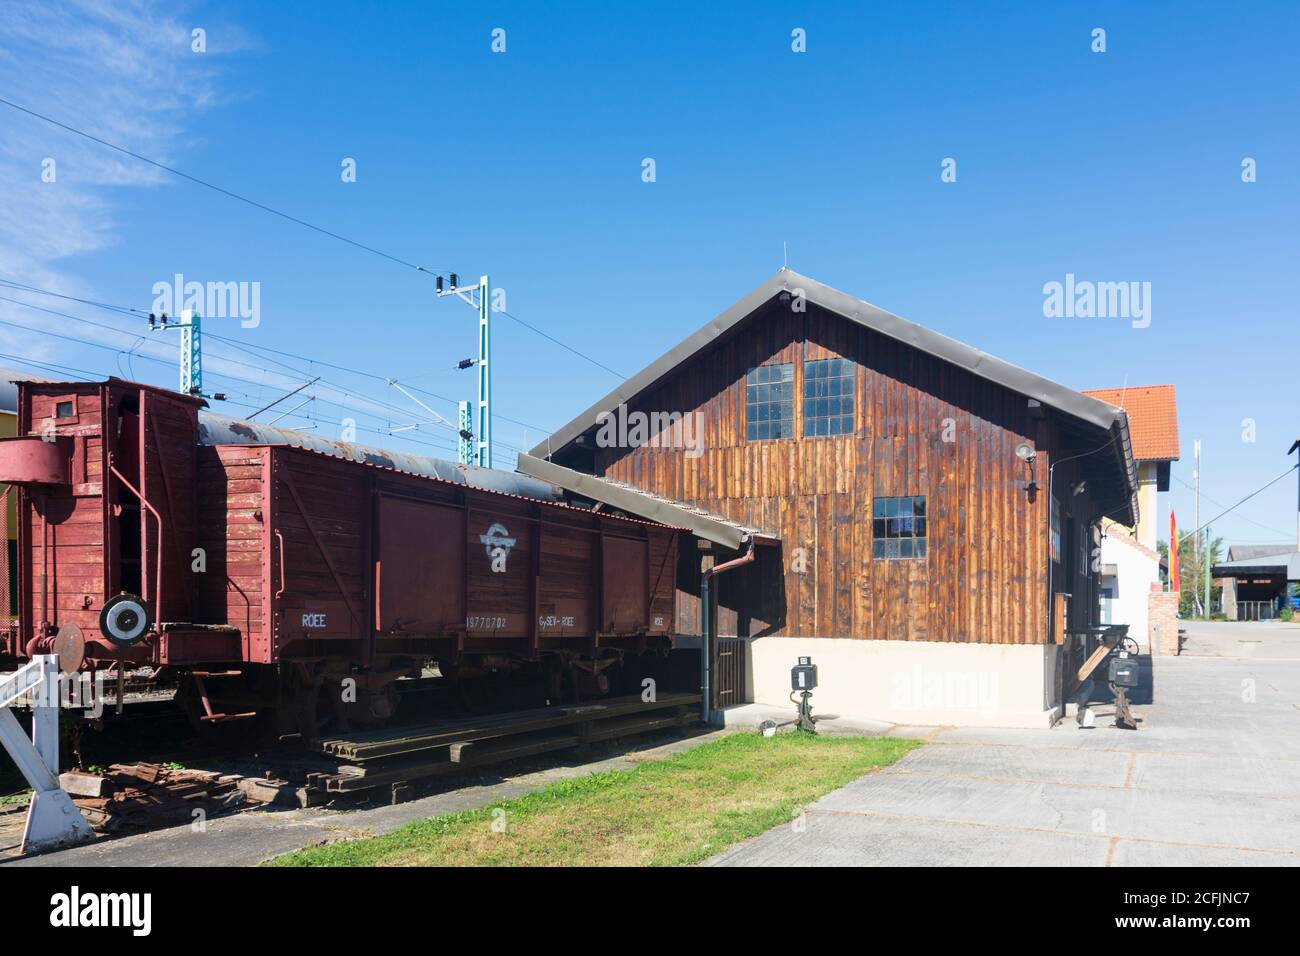 Mönchhof: old train station building with museum in Neusiedler See (Lake Neusiedl), Burgenland, Austria Stock Photo